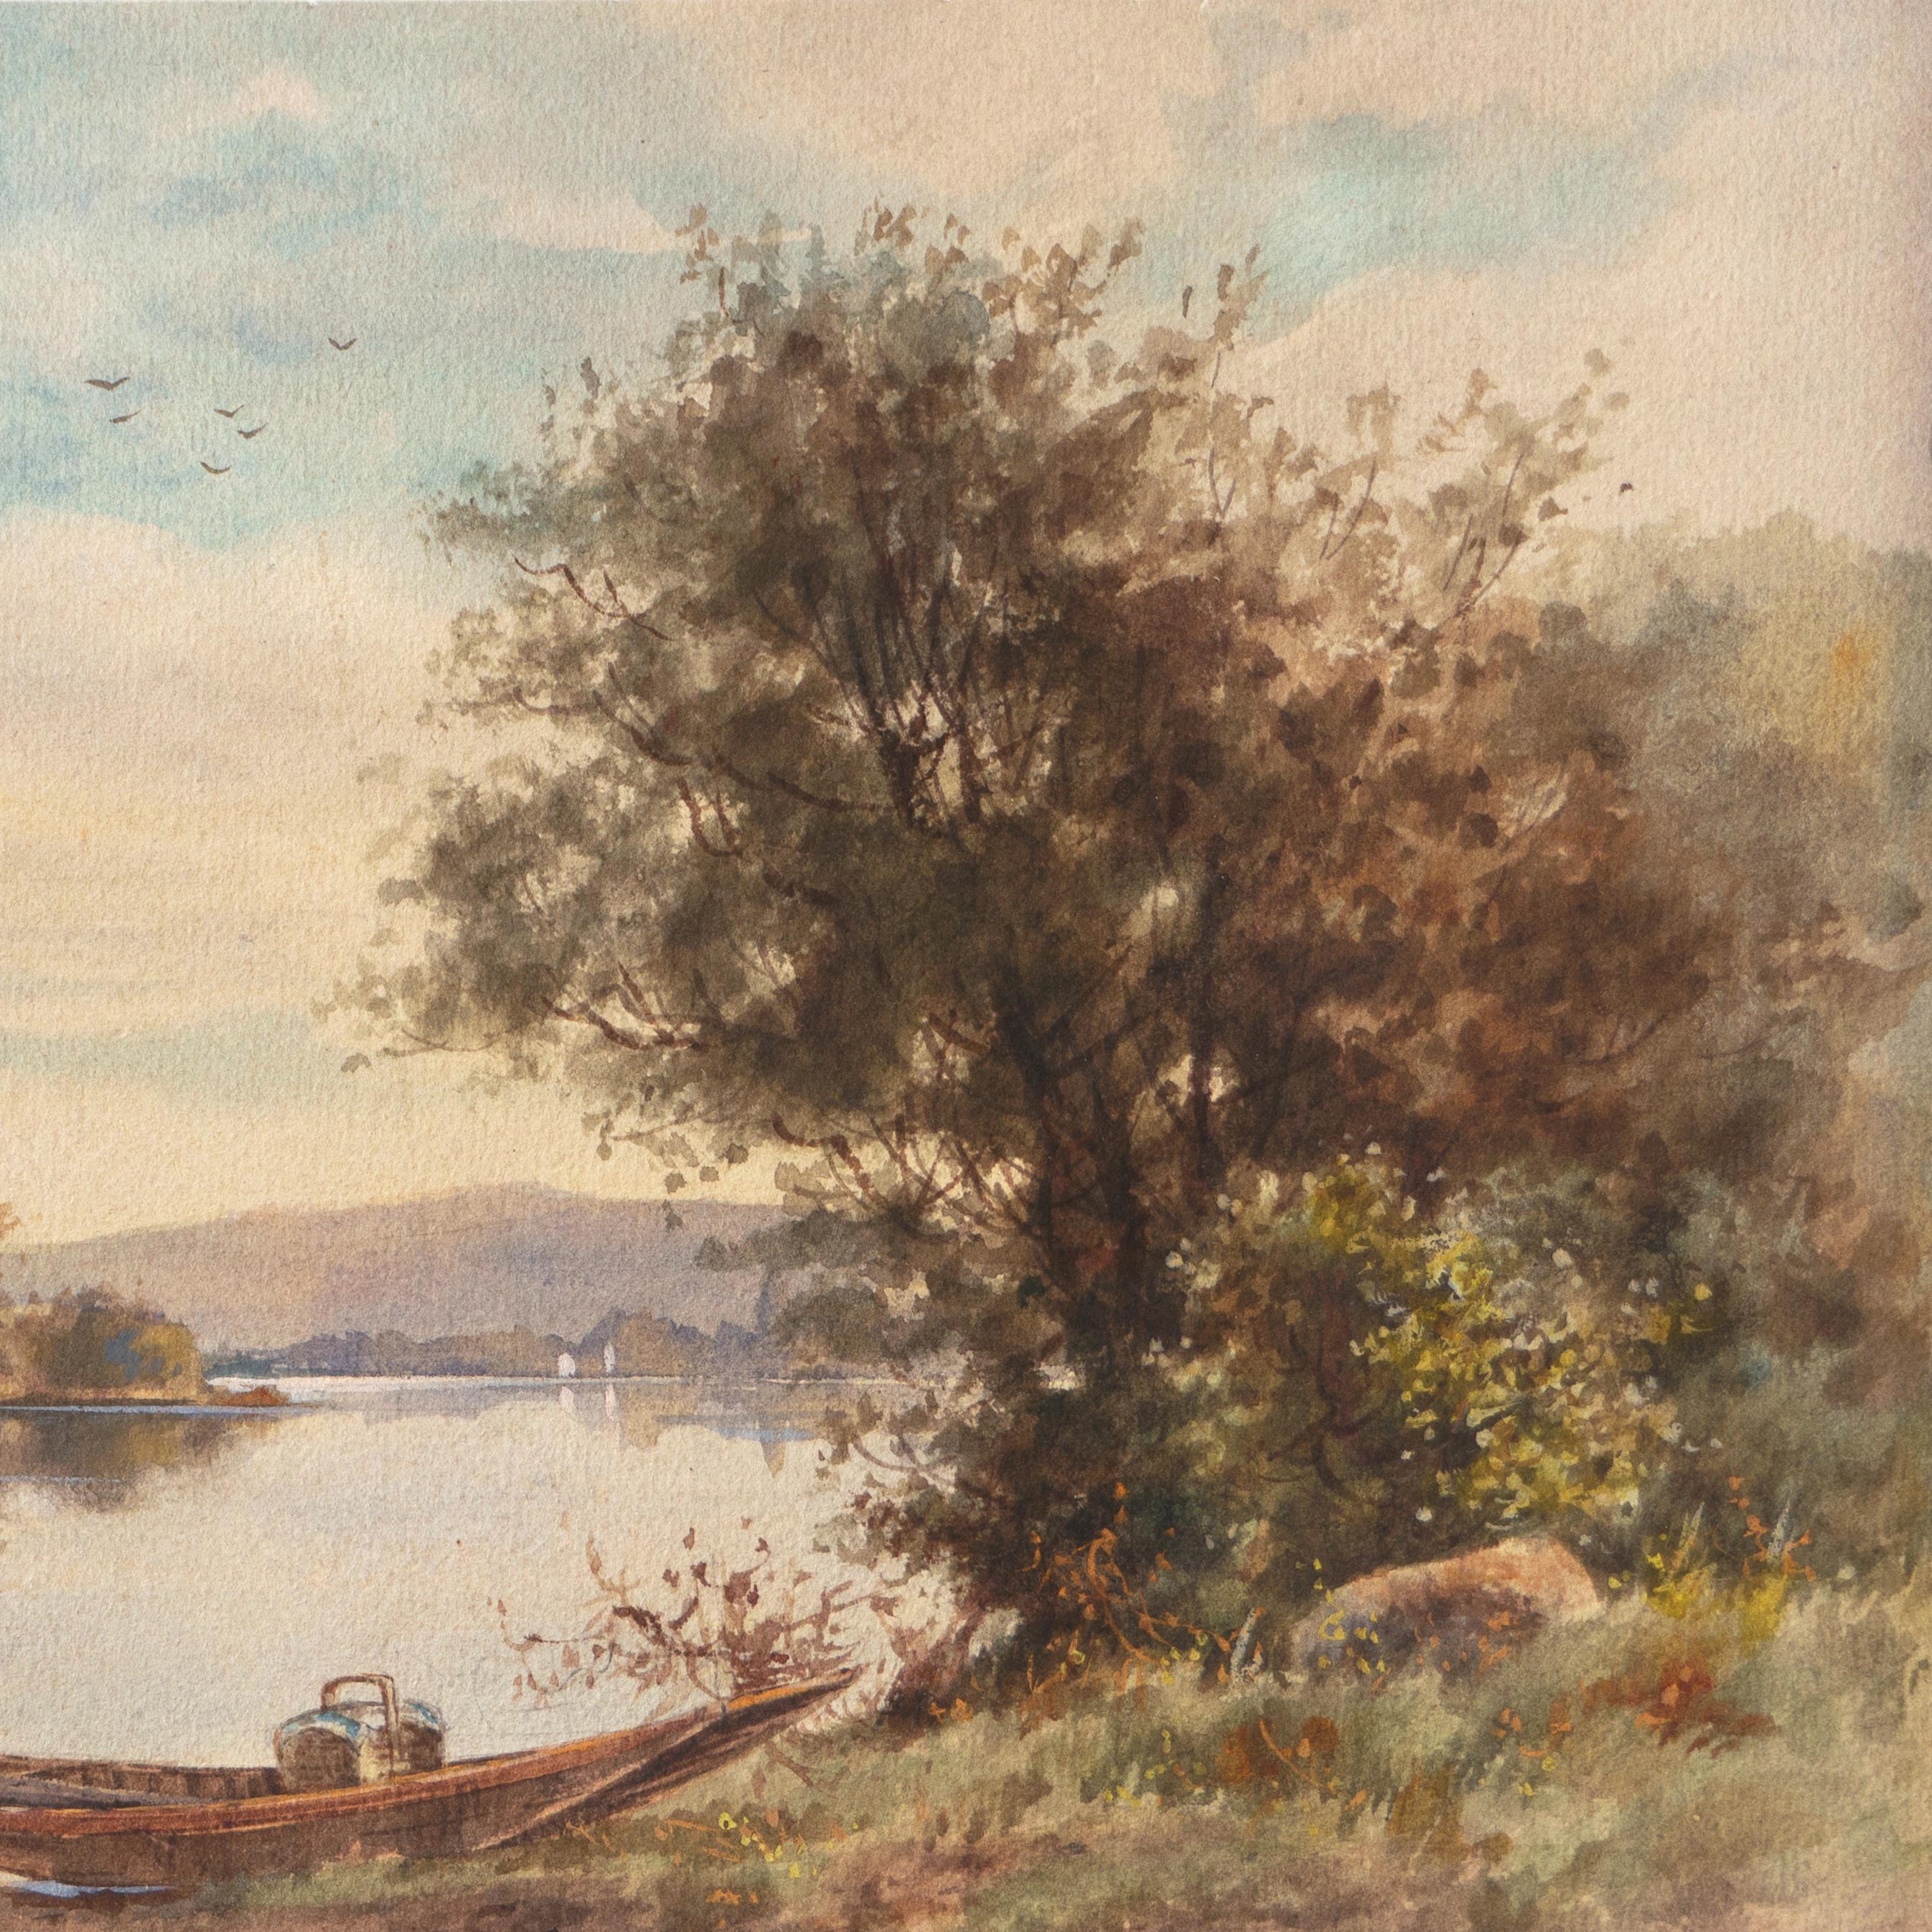 'A Picnic by the River', Early California Watercolorist - Academic Art by Albert Matthews